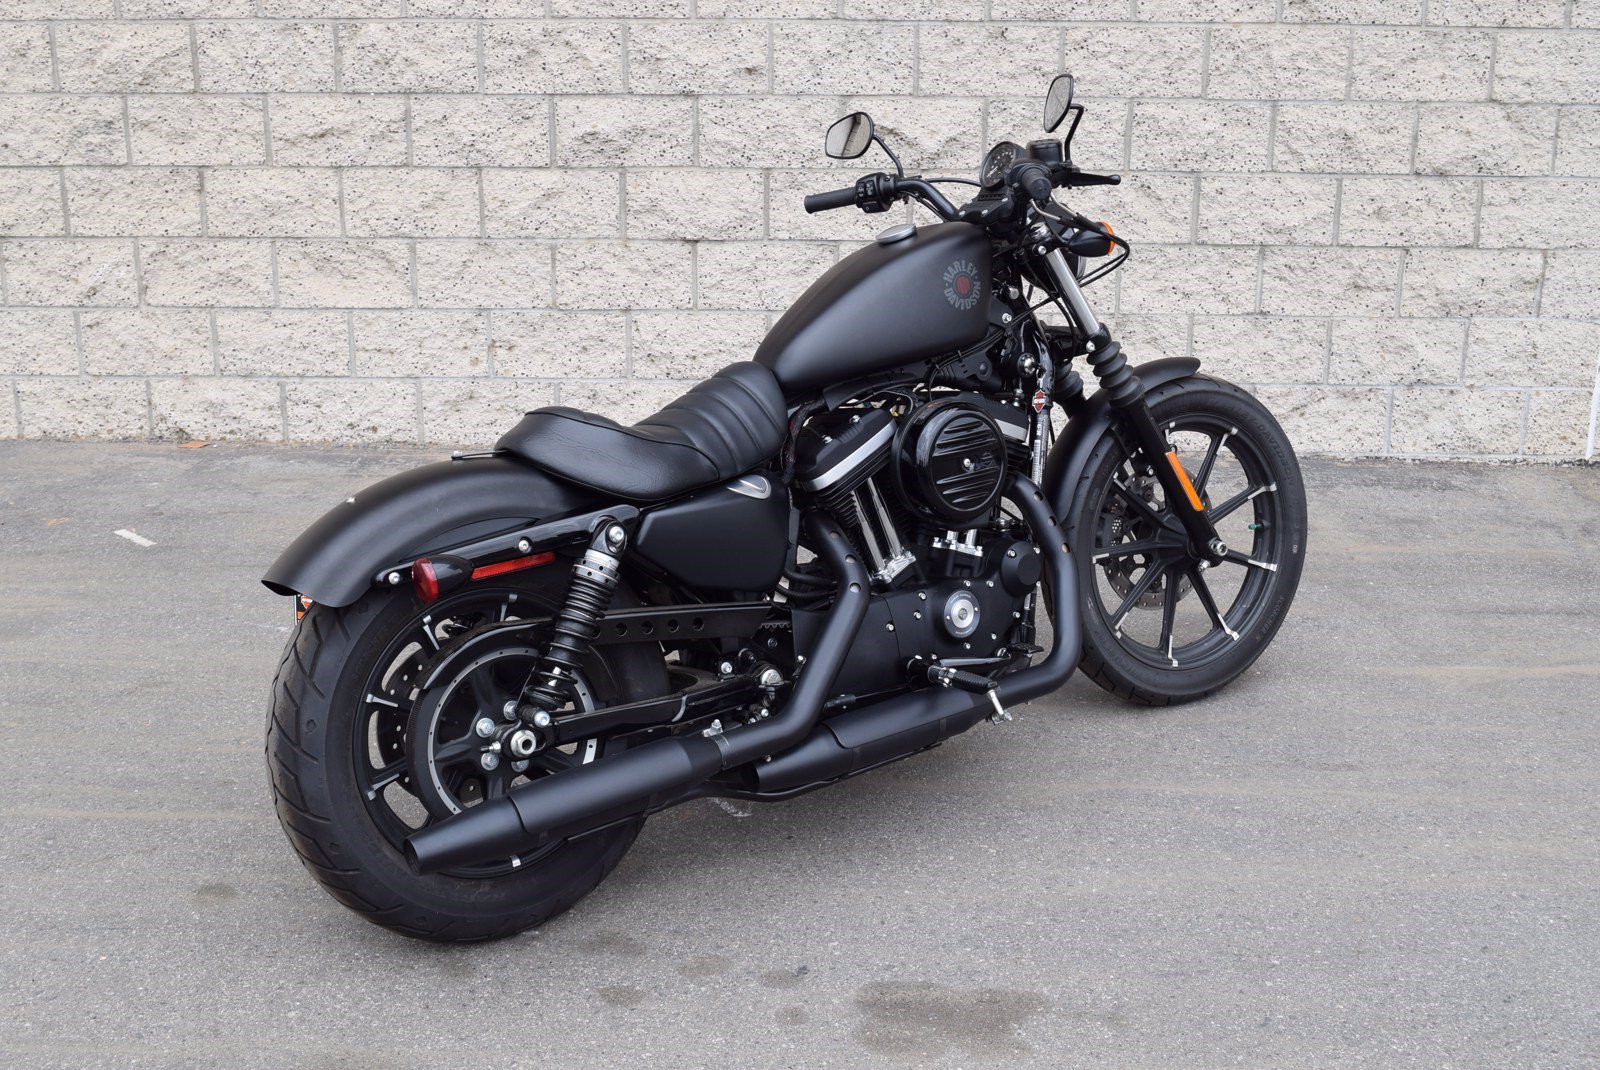 Pre-Owned 2020 Harley-Davidson Sportster Iron 883 XL883N Sportster in